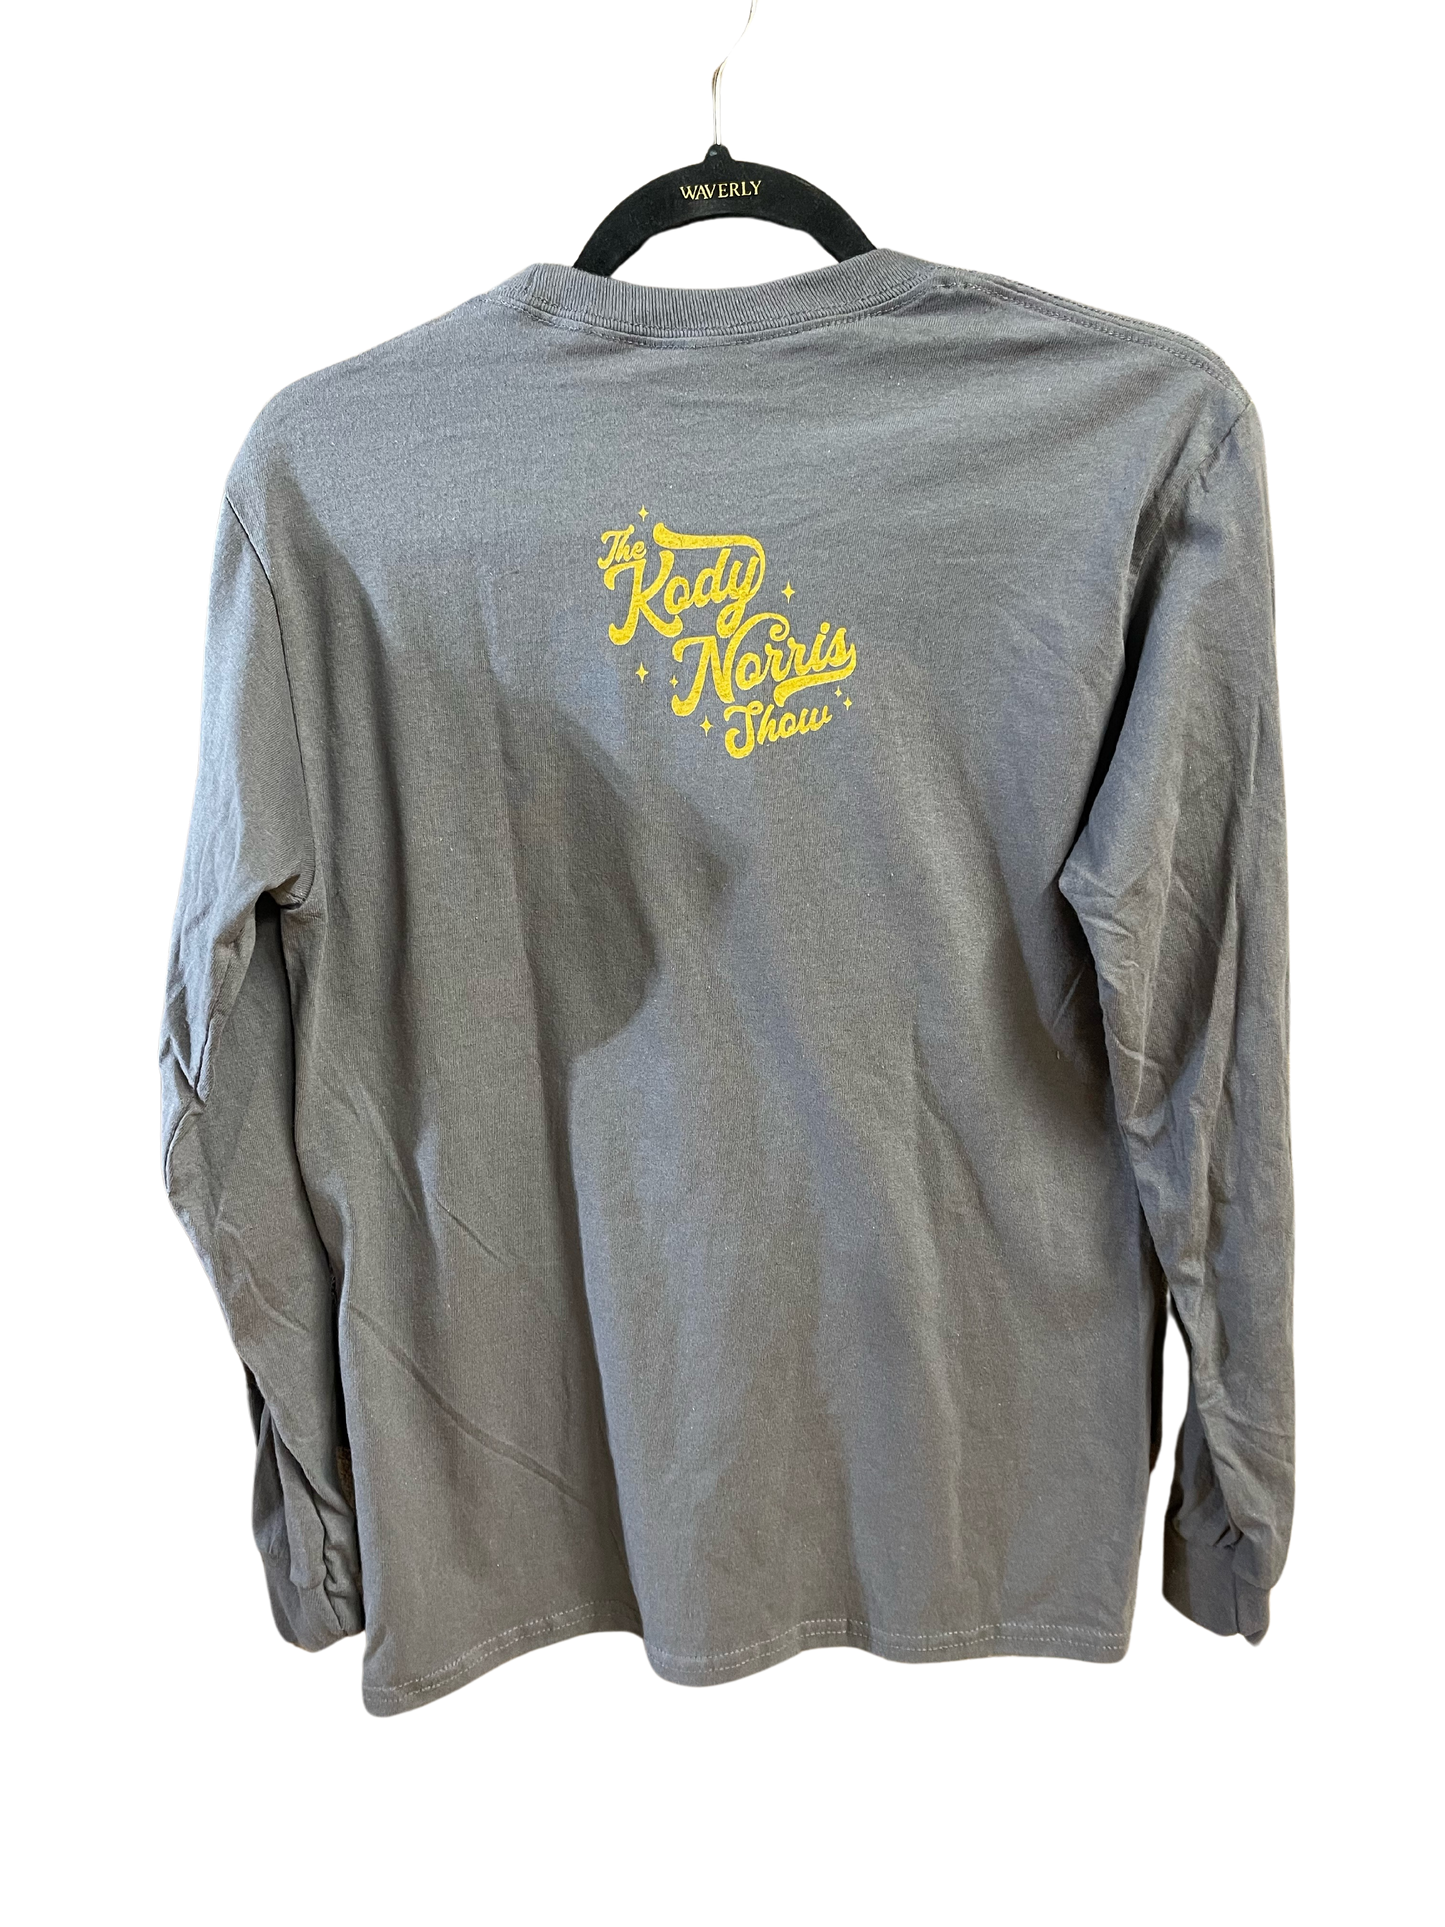 The Kody Norris Show Graphic Tee (Long Sleeve, Color Charcoal)  Charcoal with Gold Lettering.   Long Sleeve Gildan.